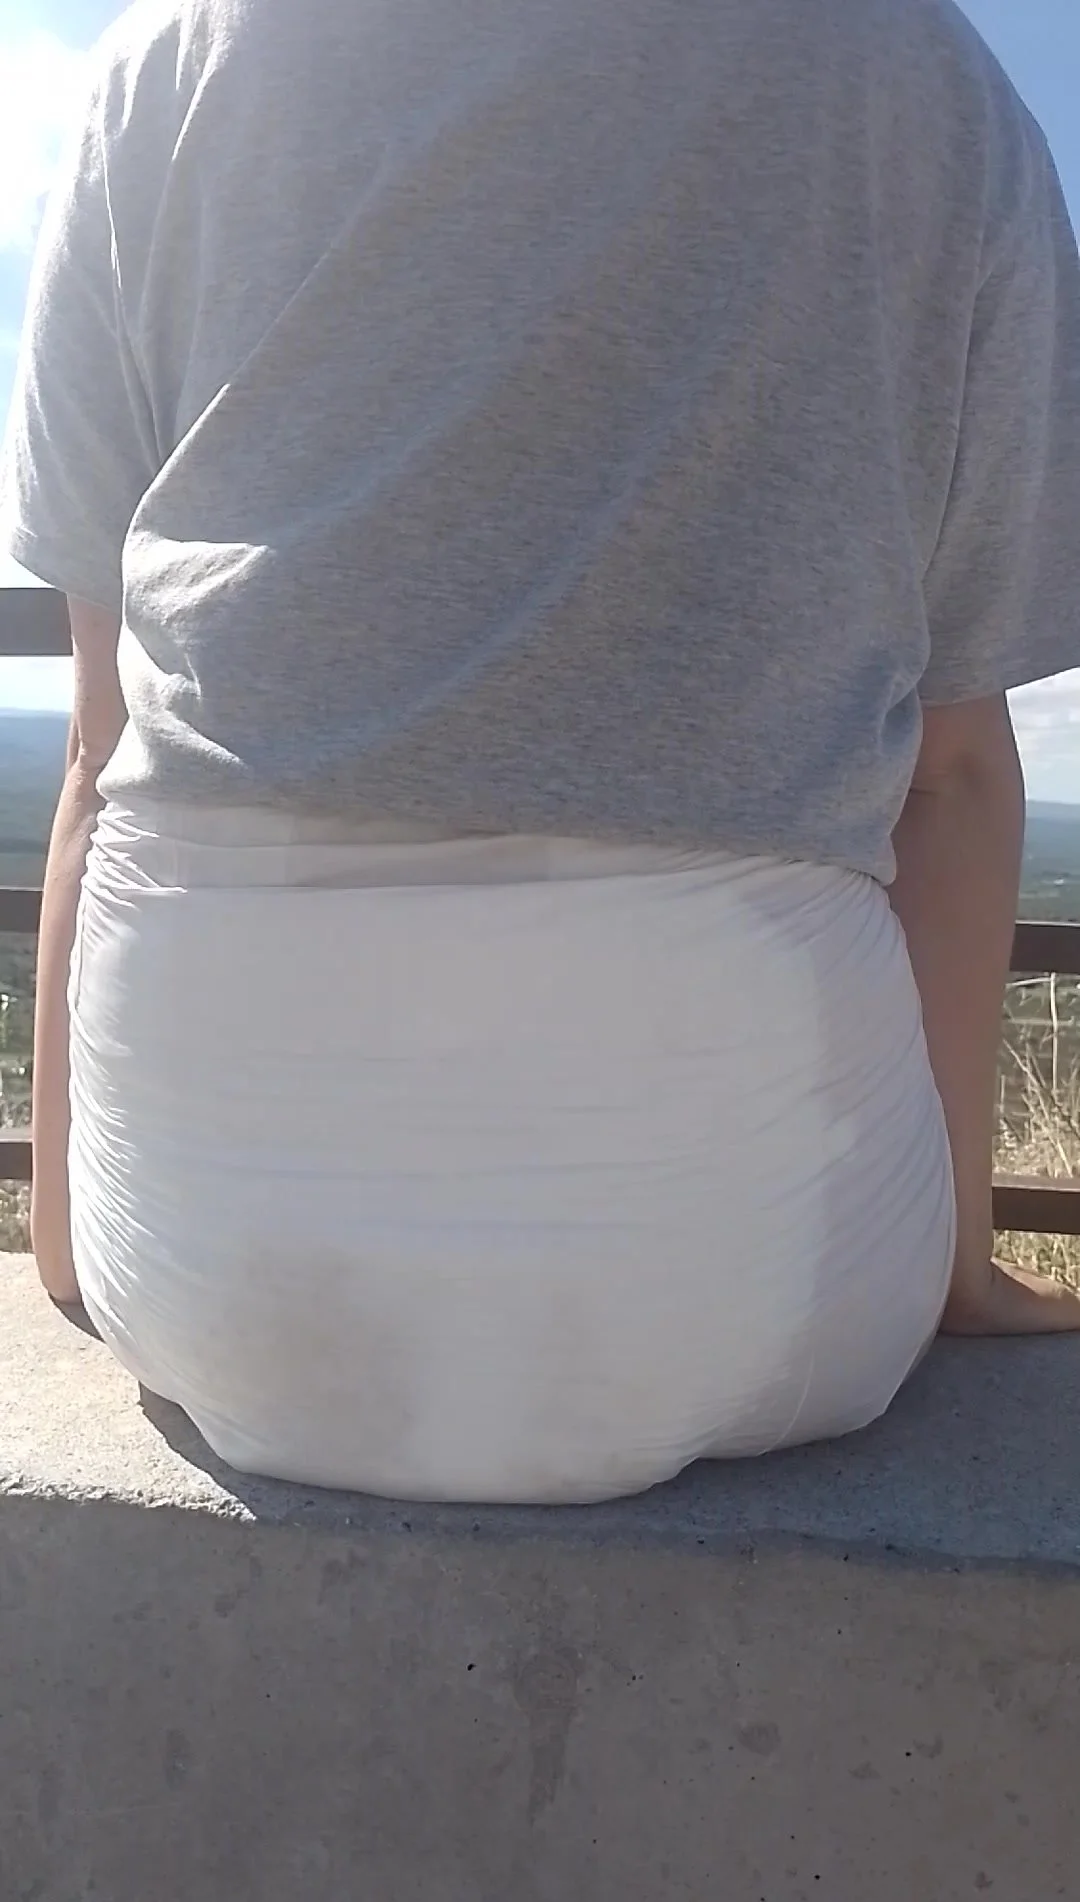 Girl walks in public with visibly wet diaper - ThisVid.com